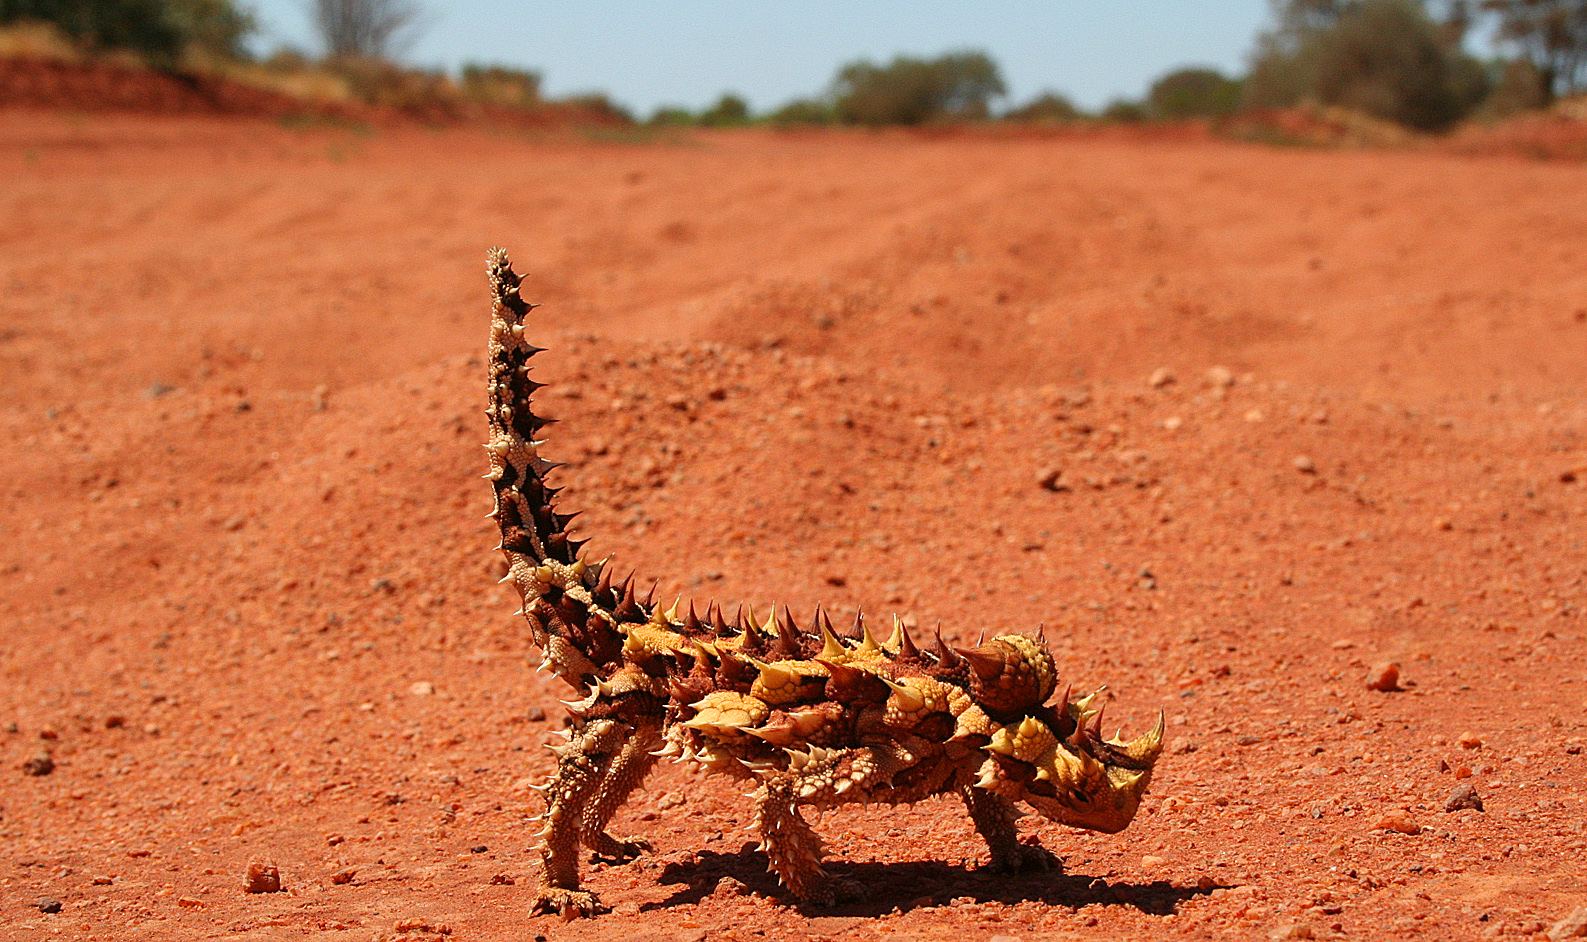 19 Thorny Devil Facts For Kids - Facts.net